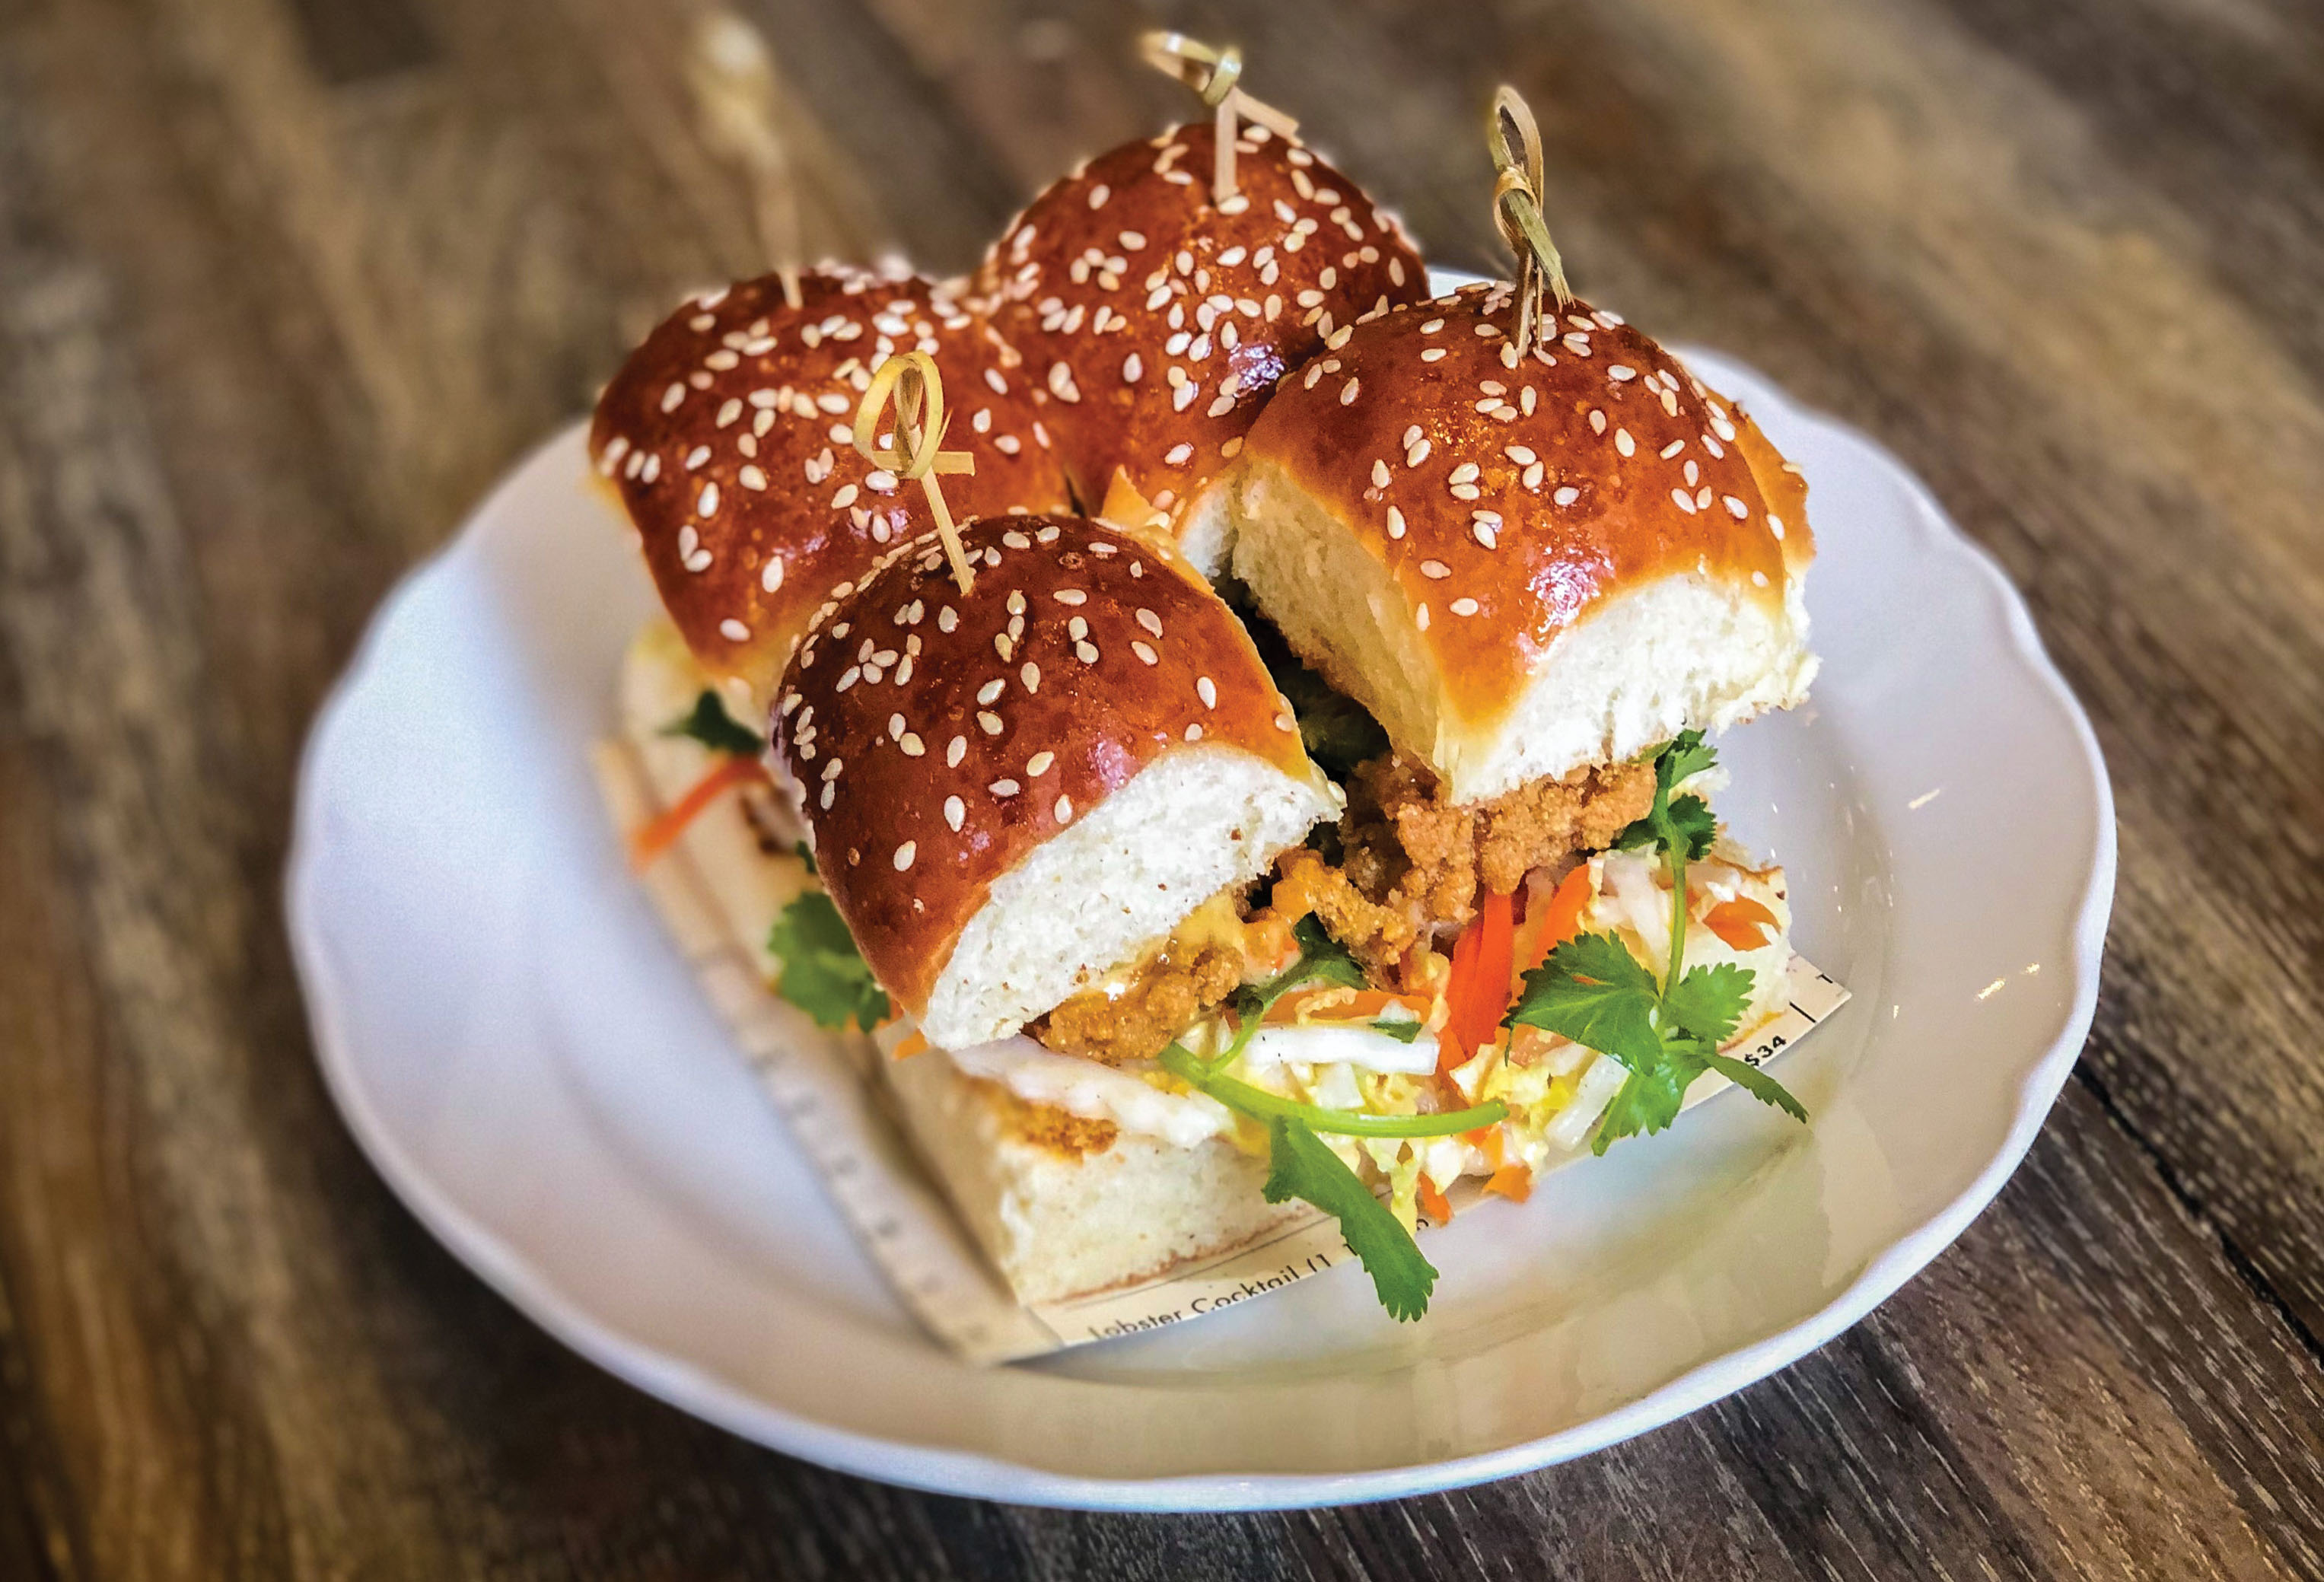 Seafood City: “The oyster sliders at The Ordinary are amazing, and the fish curries over at Chubby Fish are also incredible.”